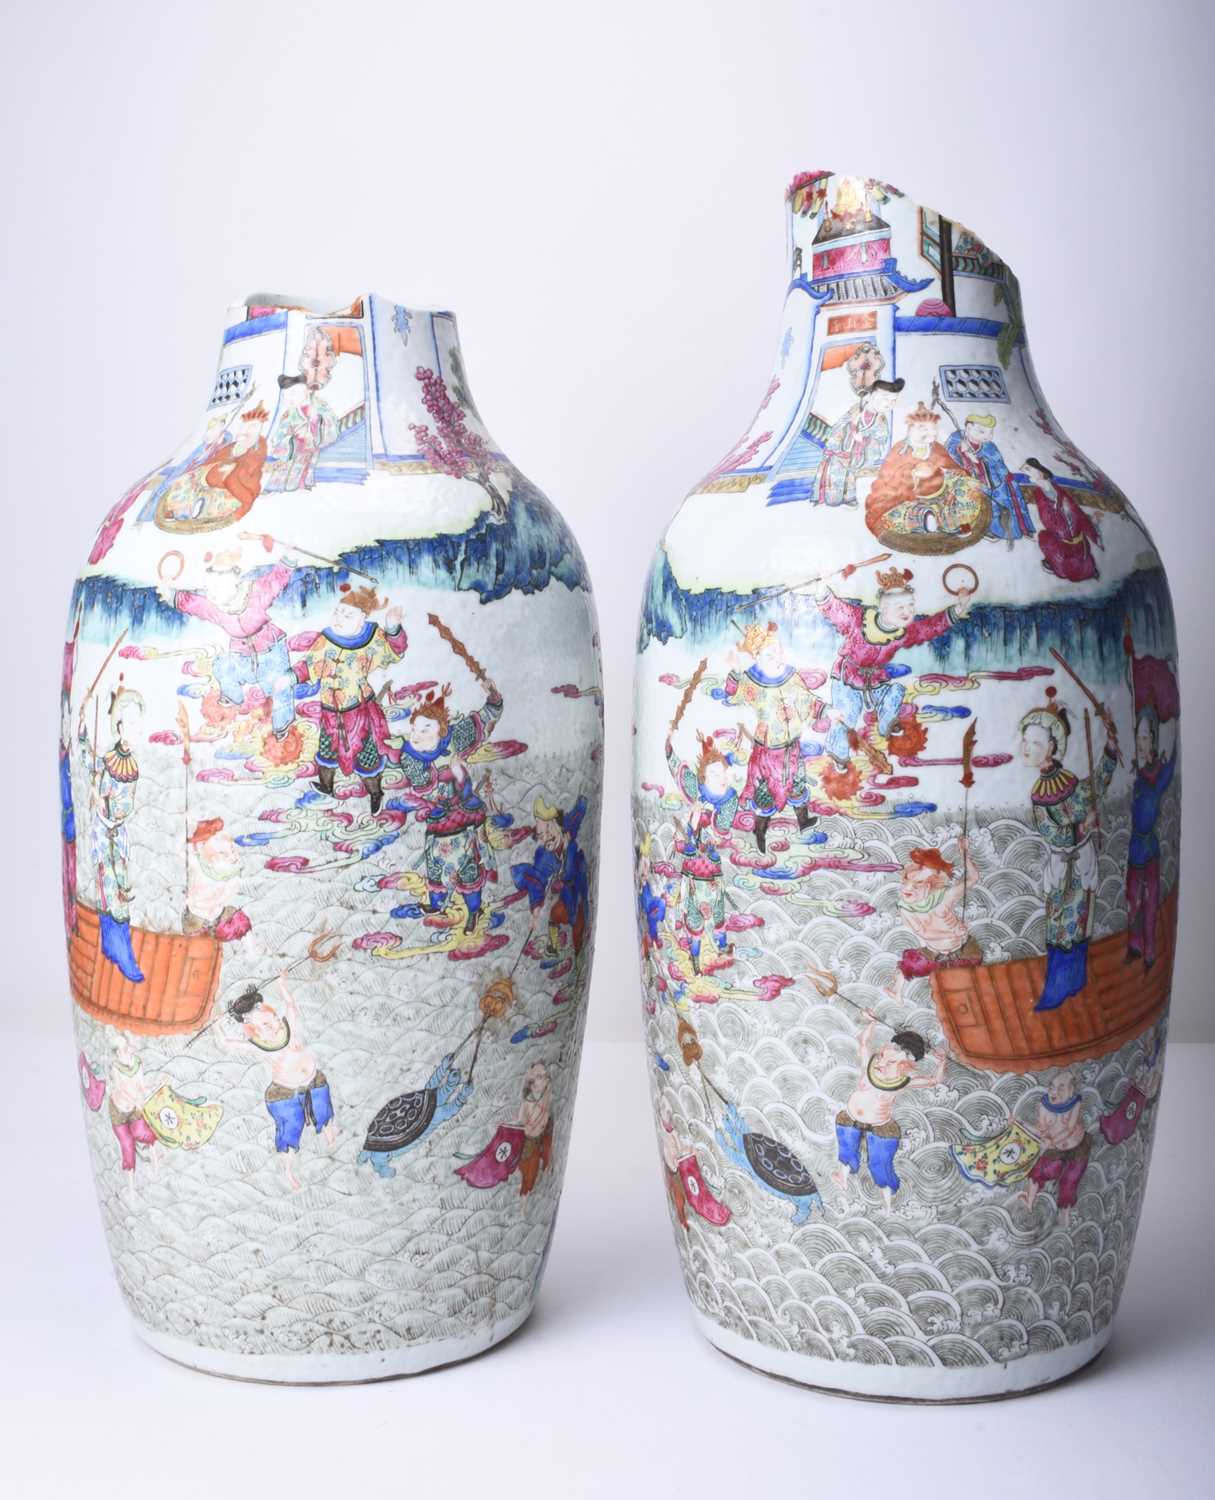 This pair of 19th century Chinese famille rose vases that sold for £3,200.